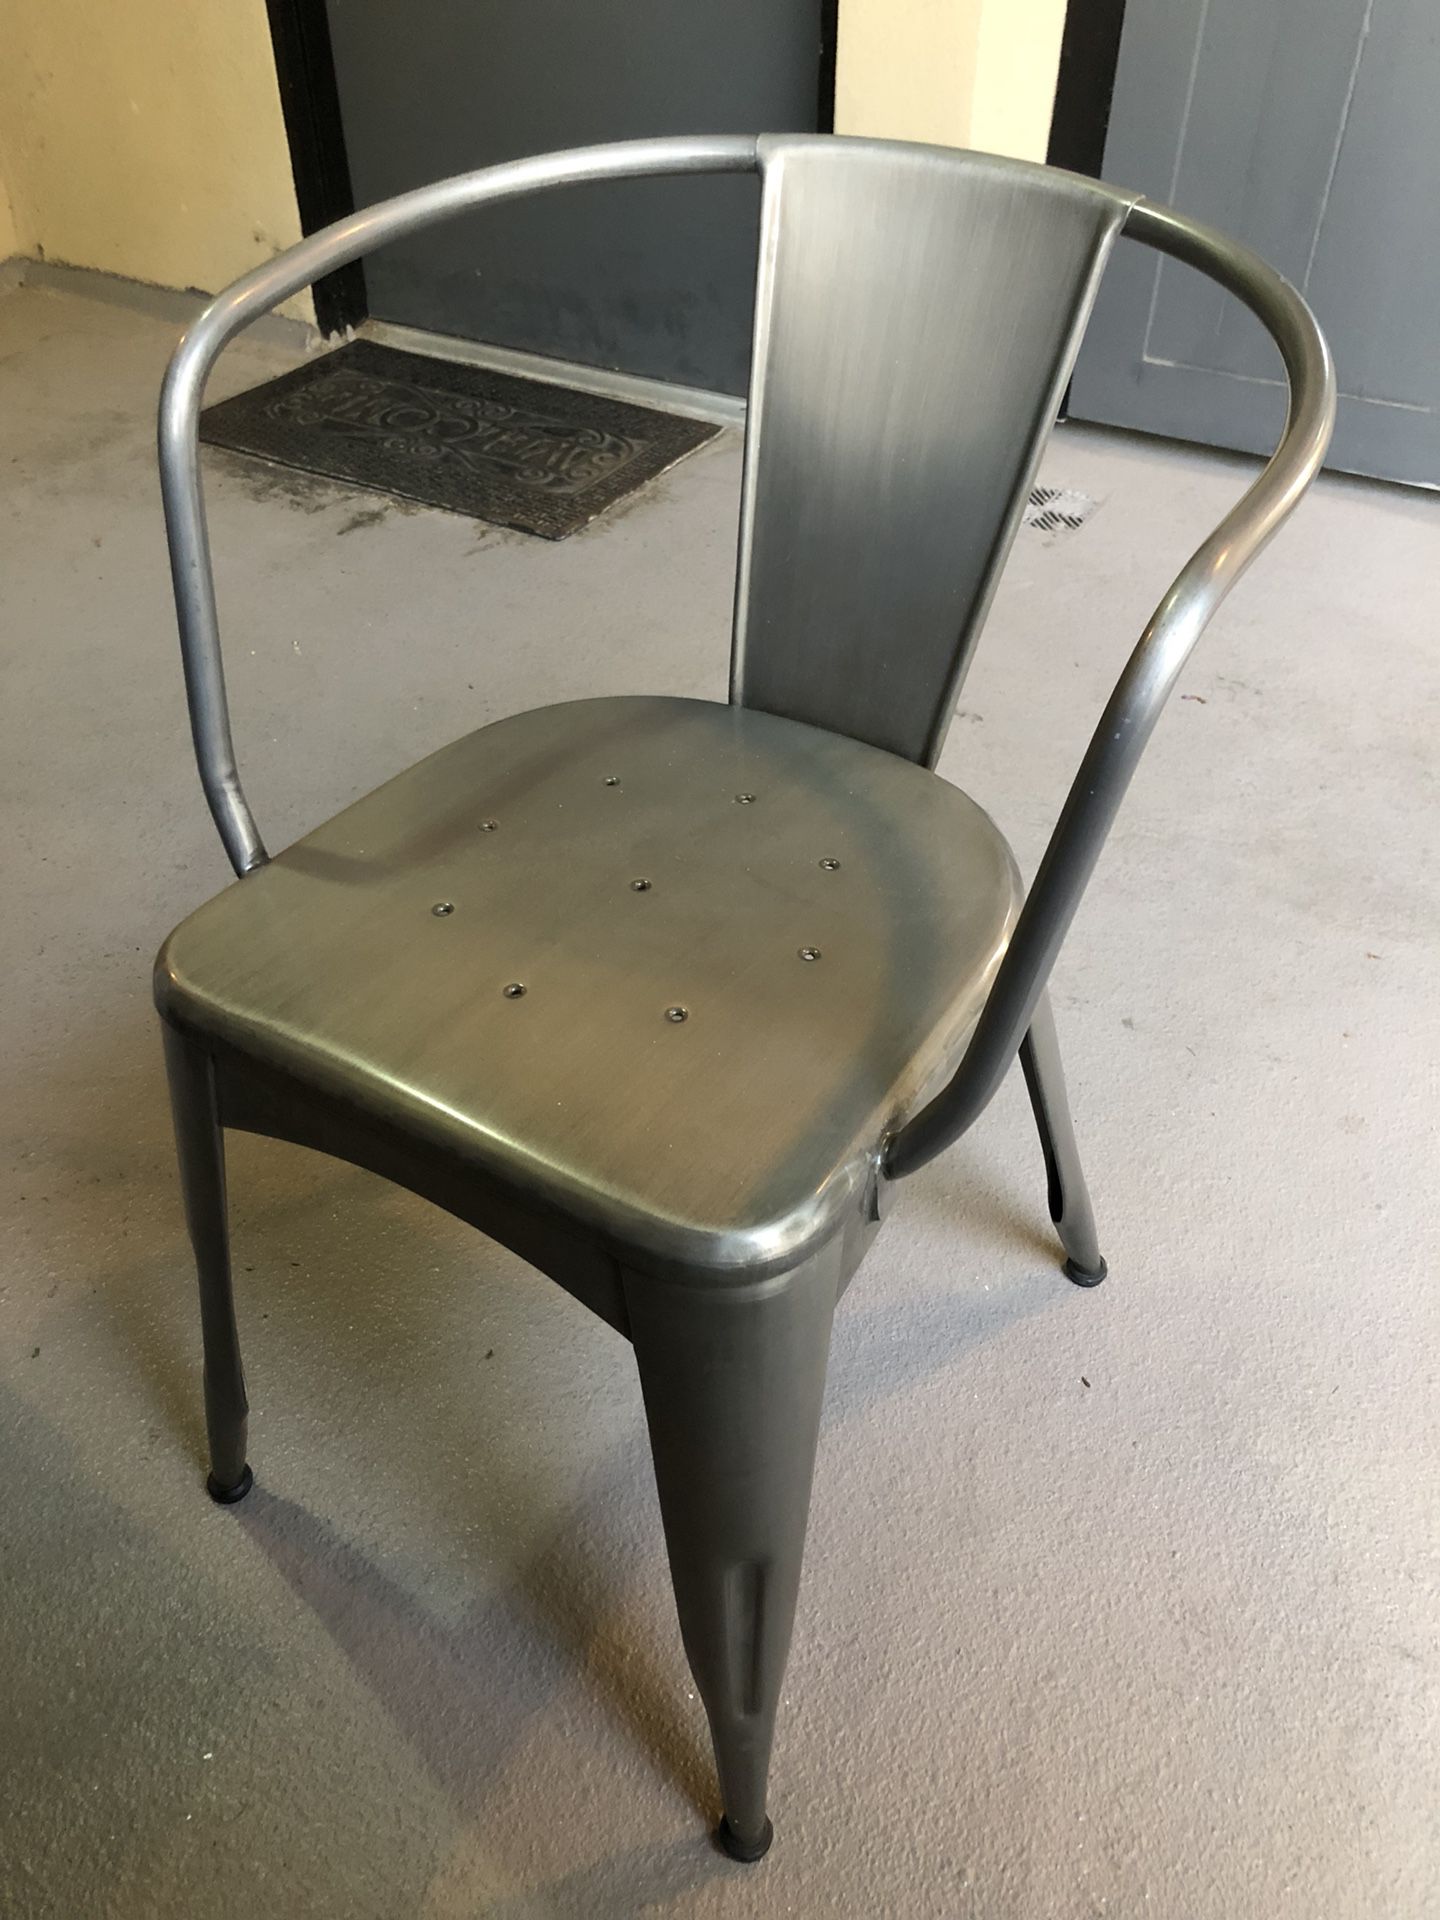 Chair - Brushed Metal - Like New Condition